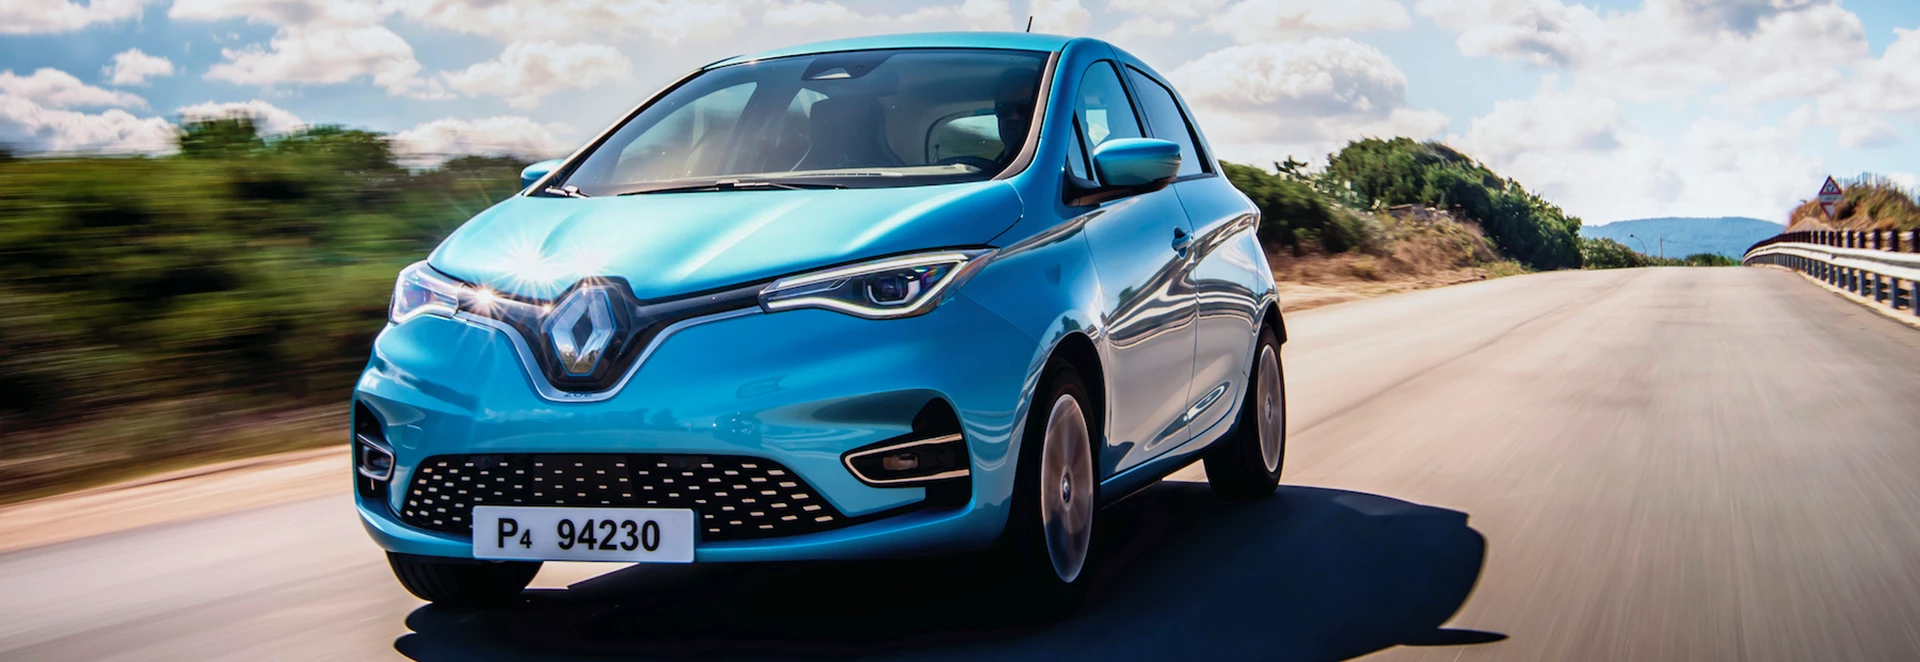 All-new Renault Zoe EV just to be offered with full purchase option